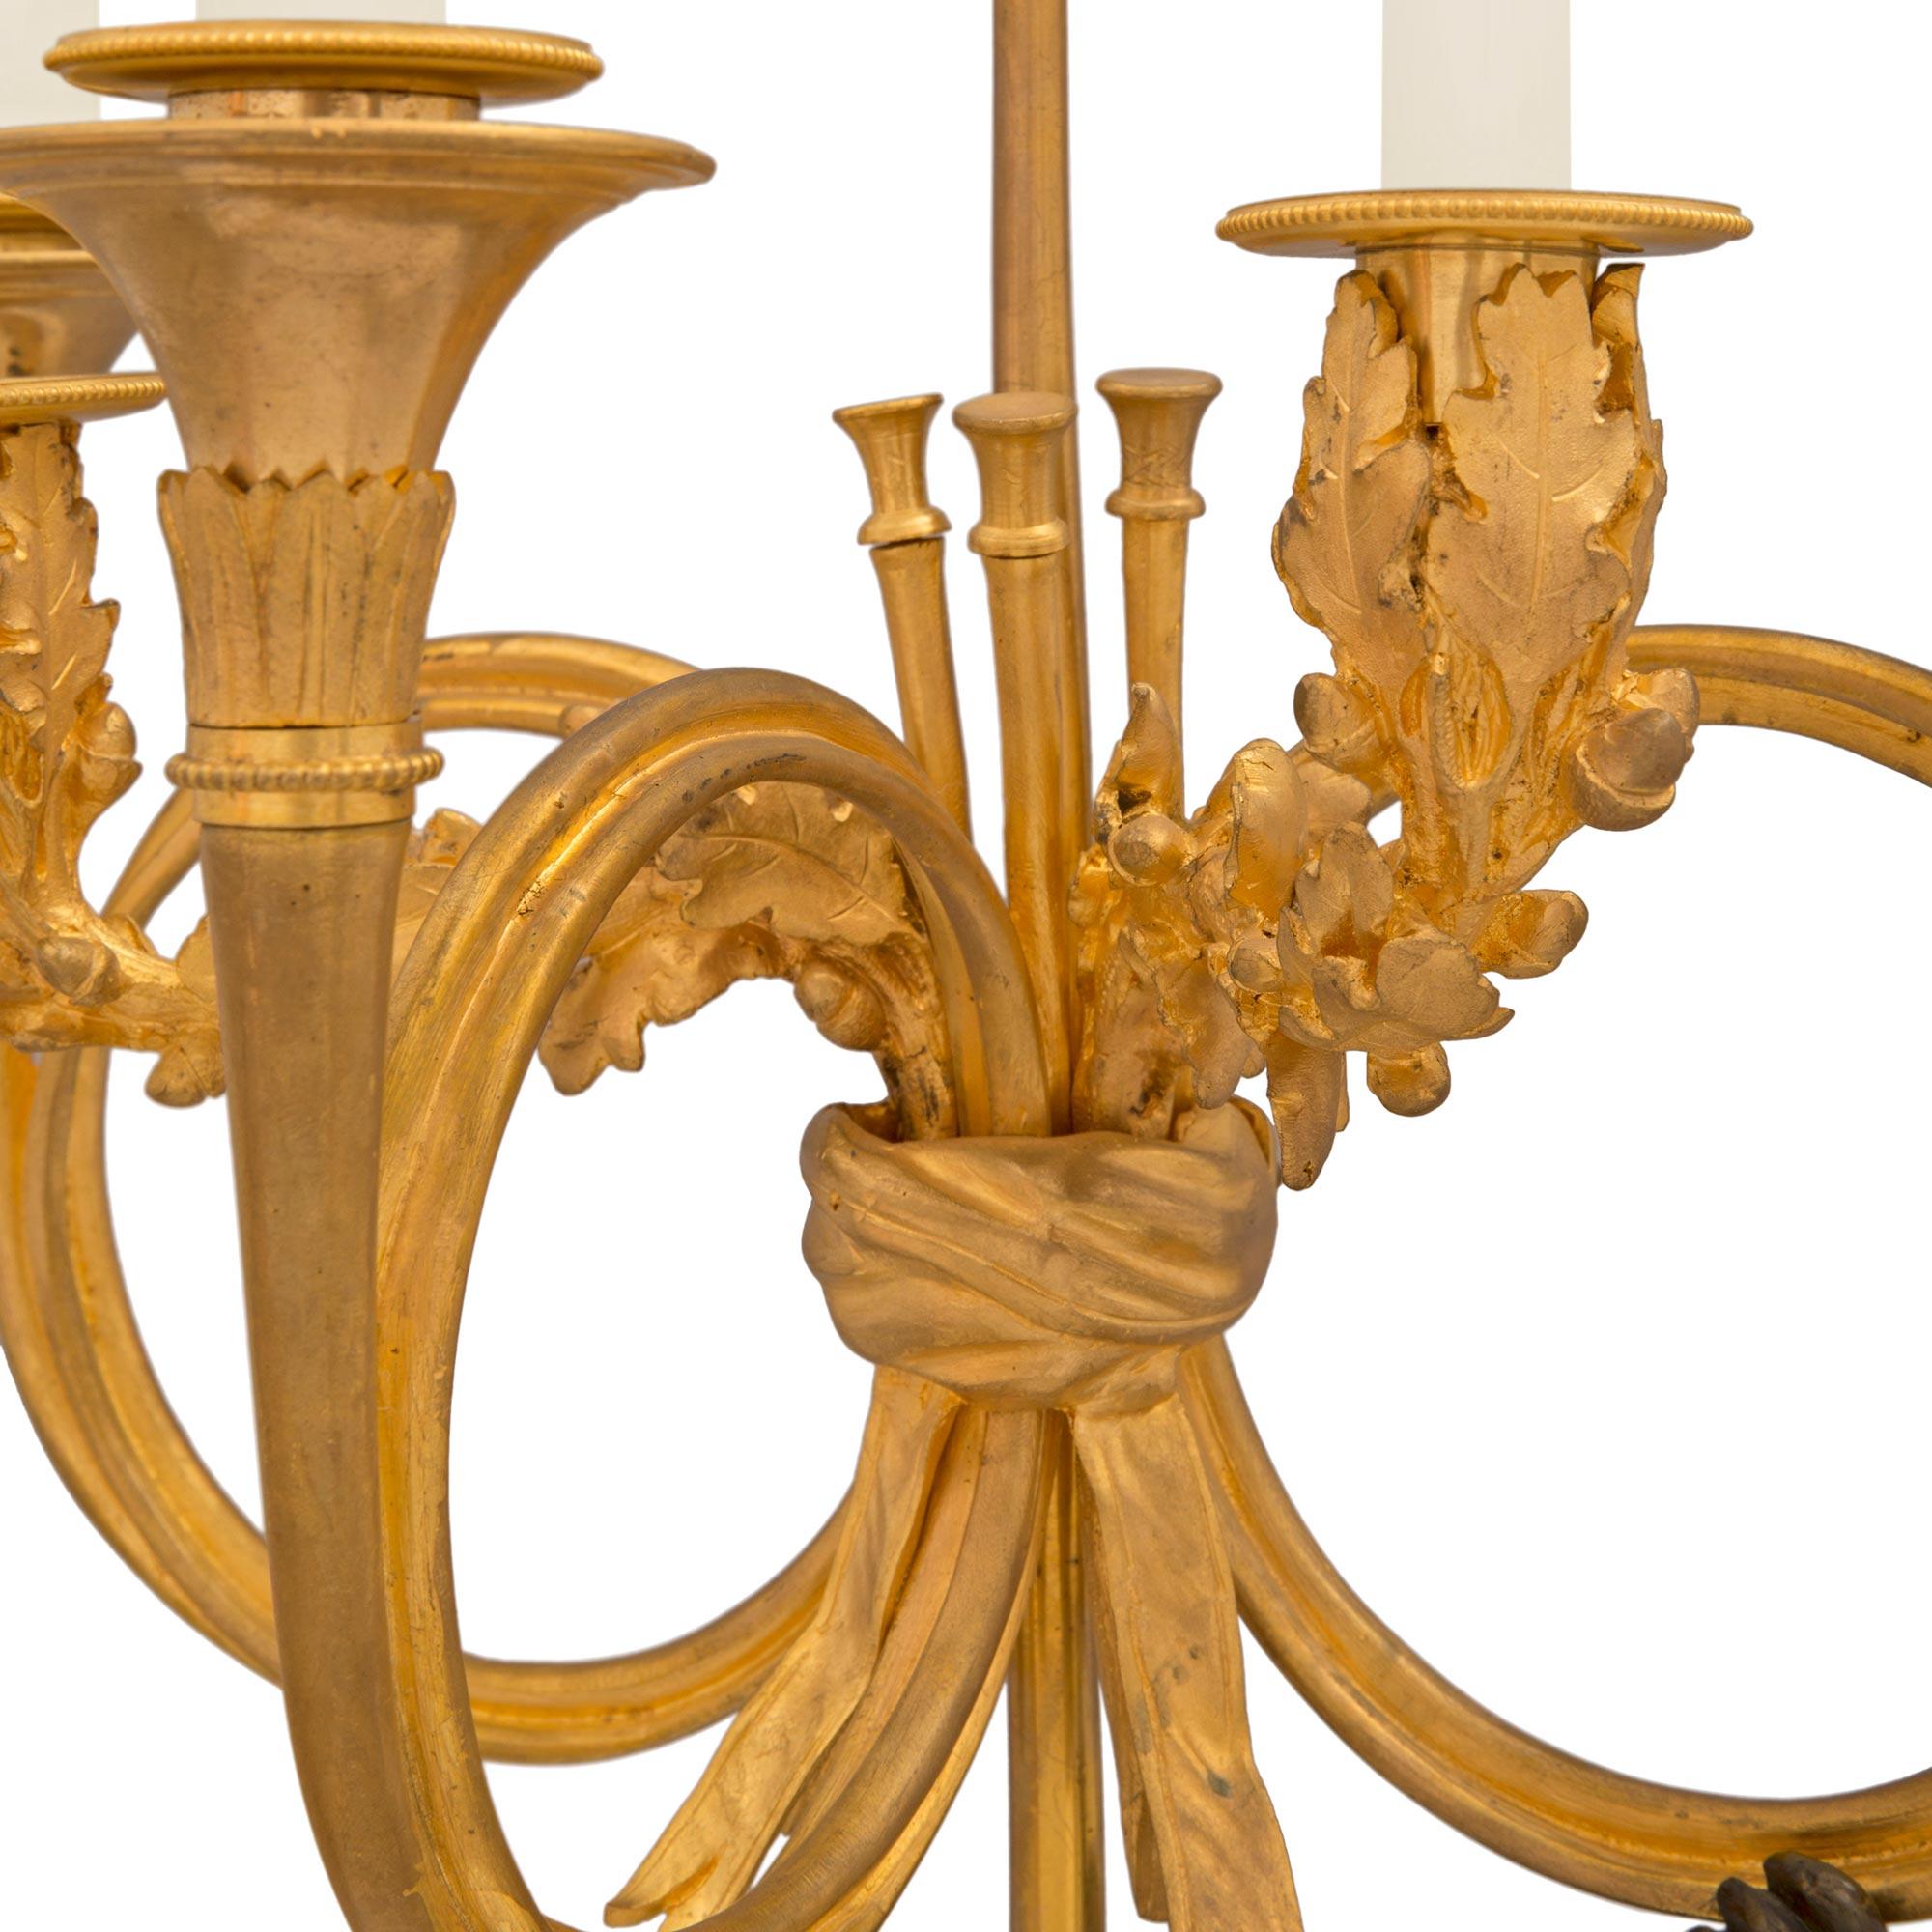 Pair of 19th Century French Louis XVI St. Bronze, Marble, and Ormolu Candelabras For Sale 3